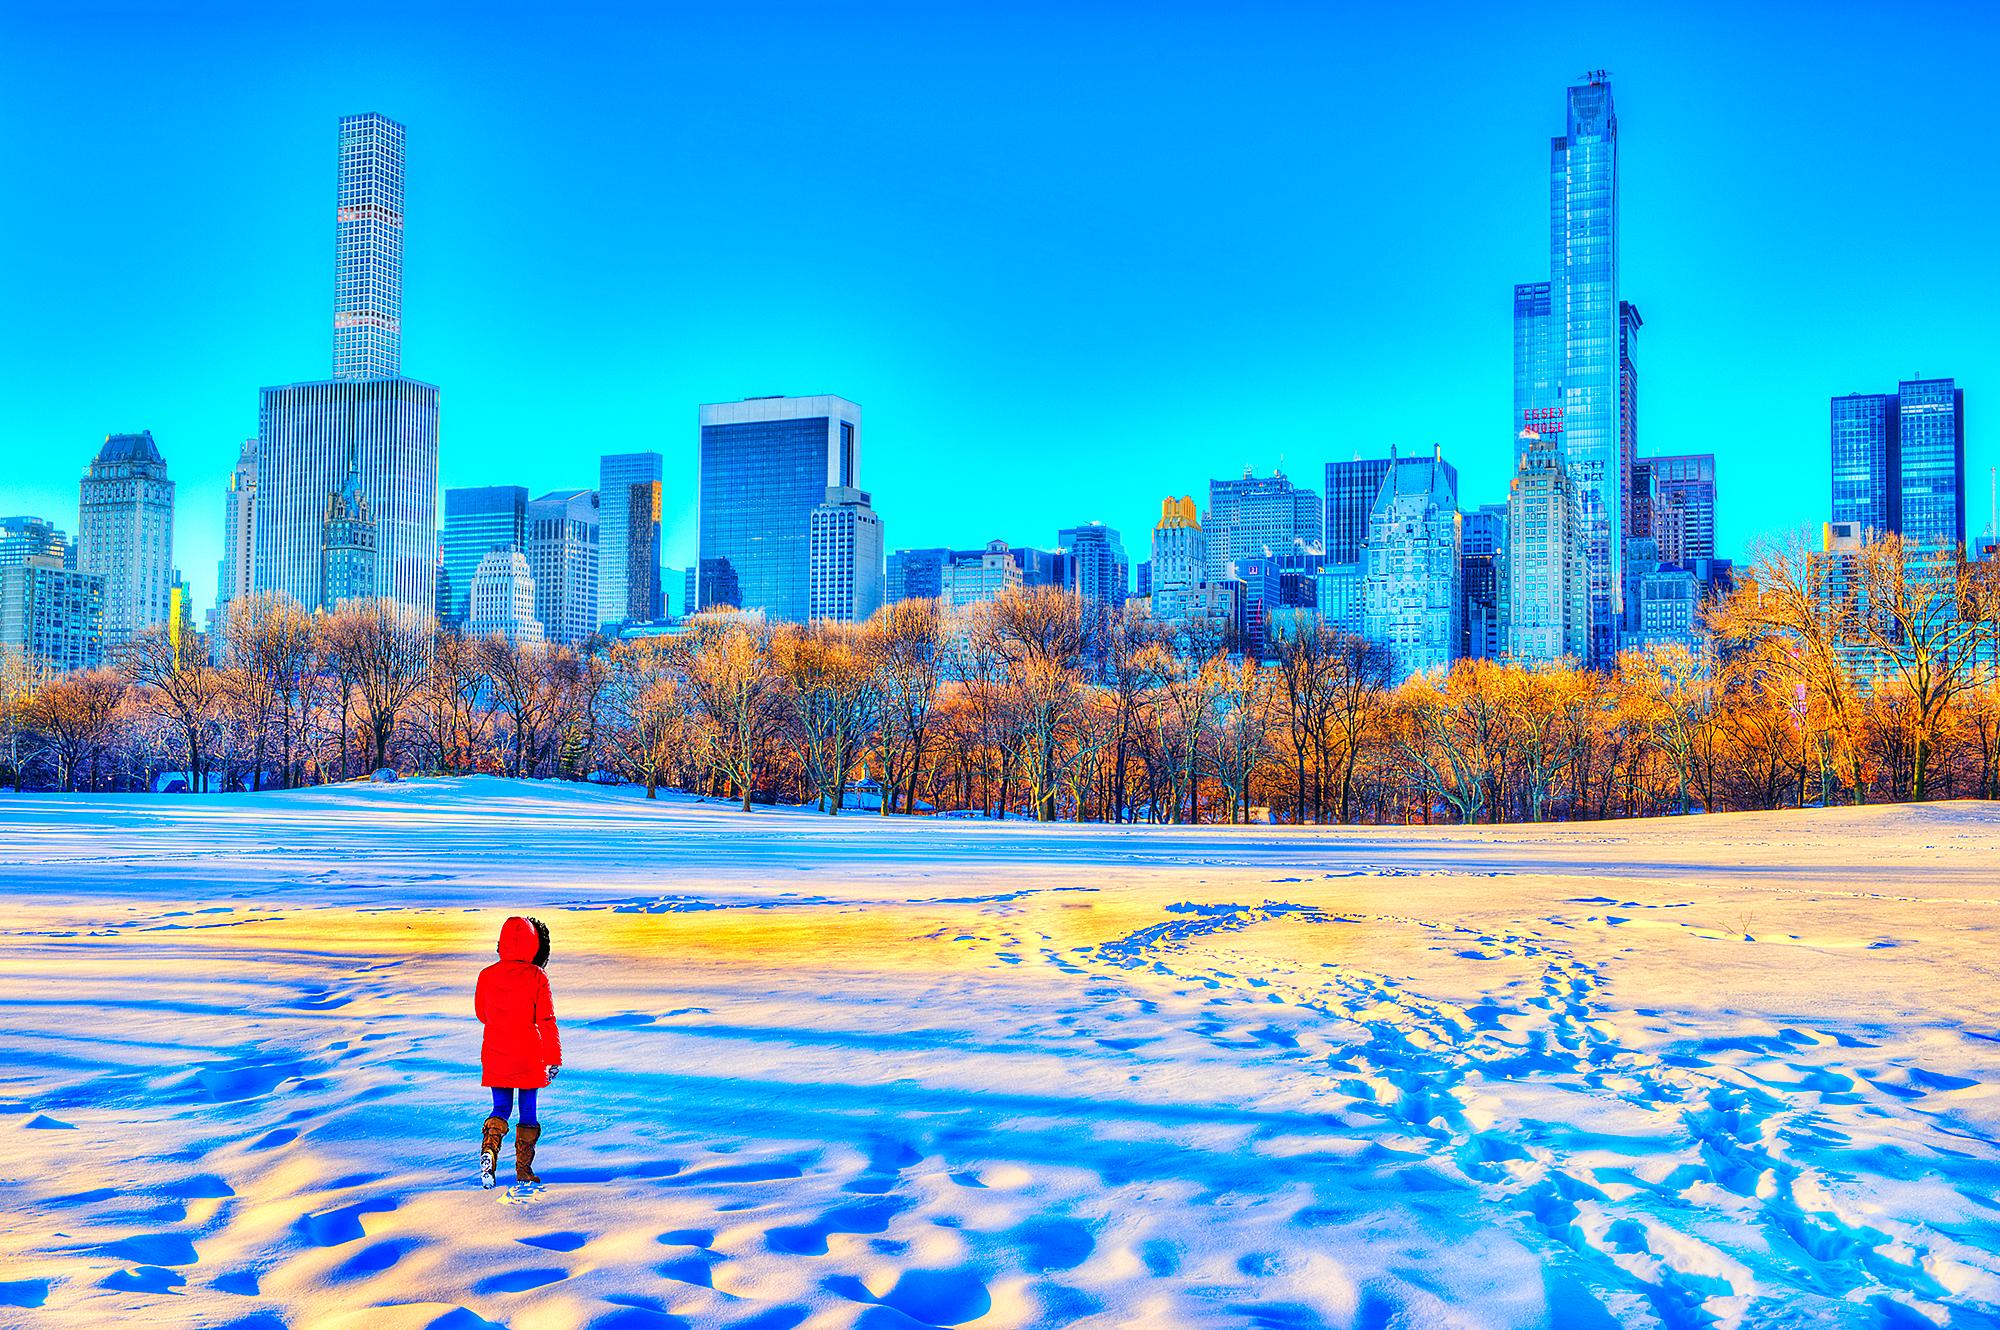 Mitchell Funk Landscape Photograph - Warm Light Of Sunrise After Snowstorm In Central Park, New York City